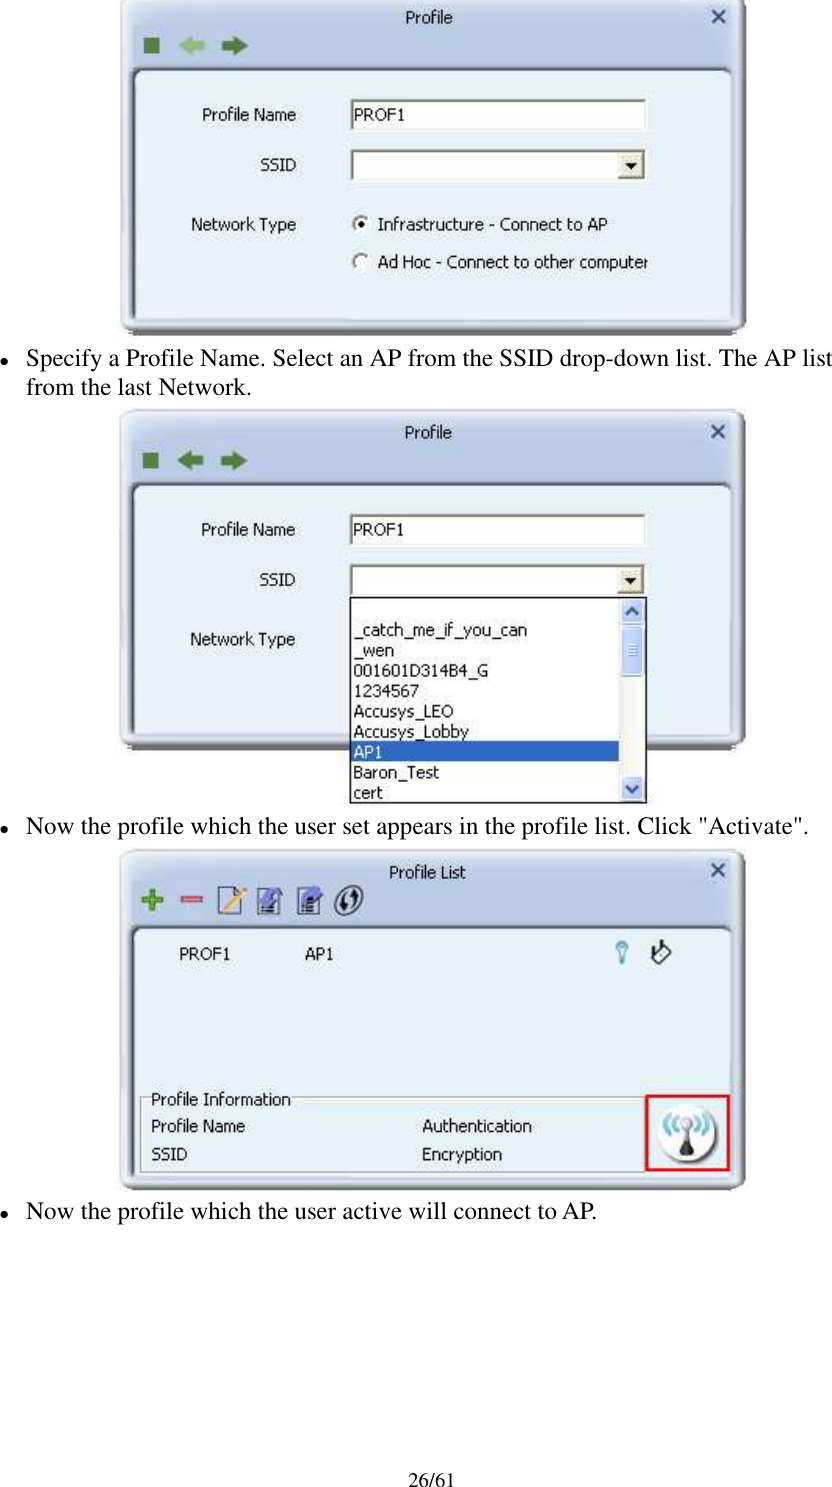 26/61Specify a Profile Name. Select an AP from the SSID drop-down list. The AP listfrom the last Network.Now the profile which the user set appears in the profile list. Click &quot;Activate&quot;.Now the profile which the user active will connect to AP.